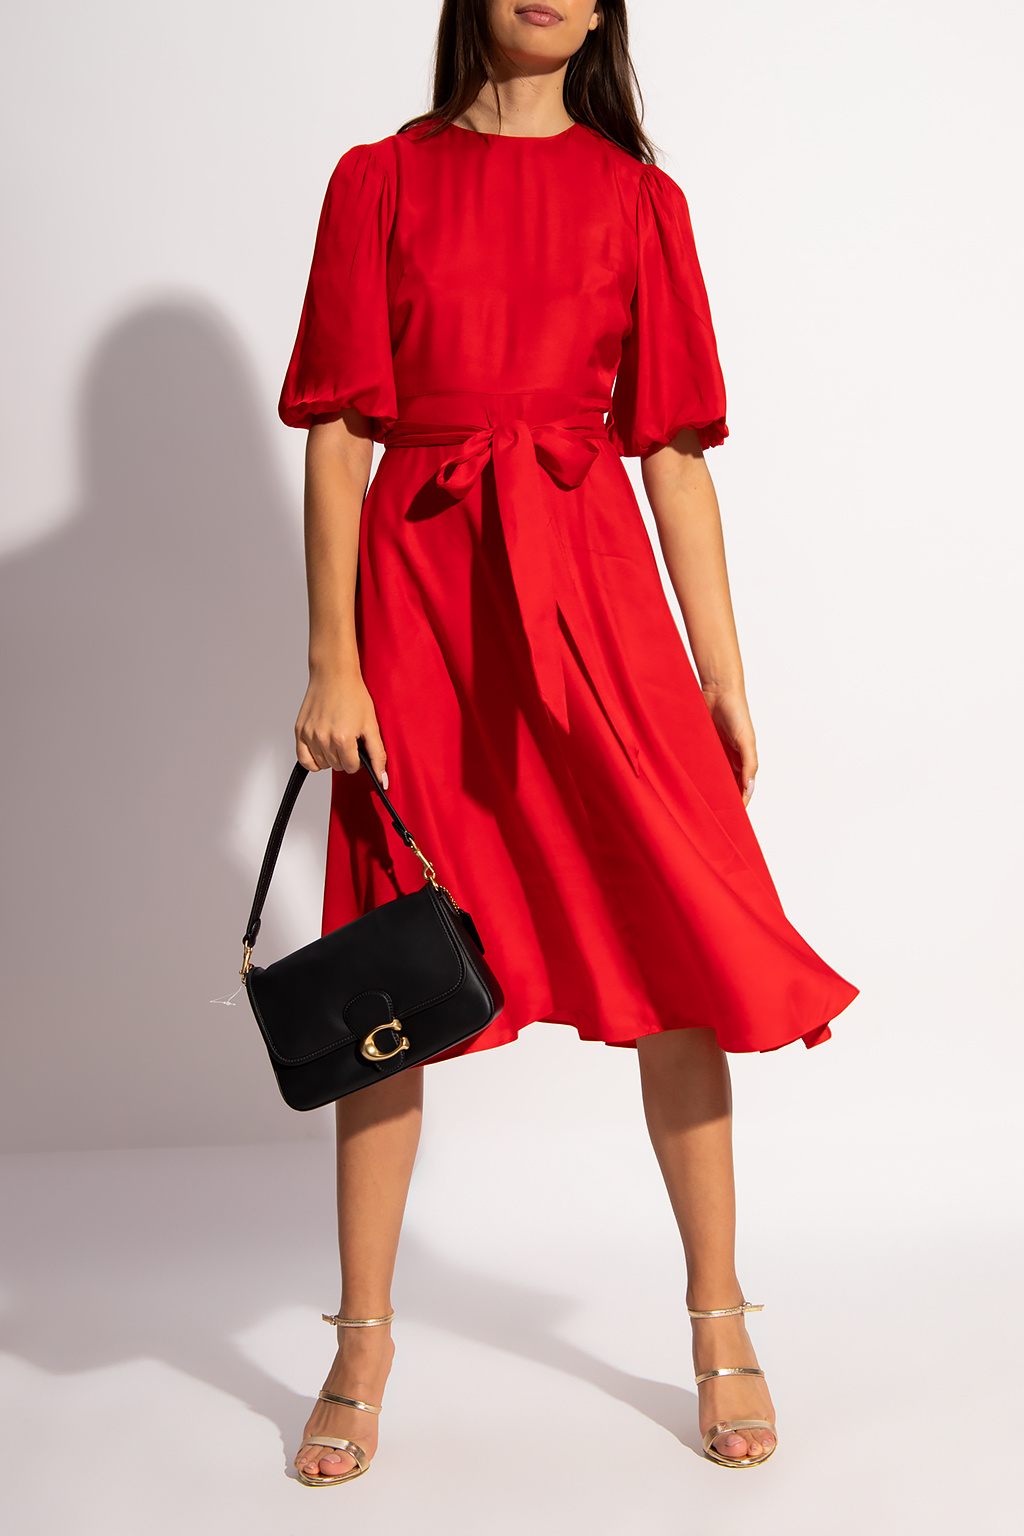 Kate Spade Dress with puff sleeves ...